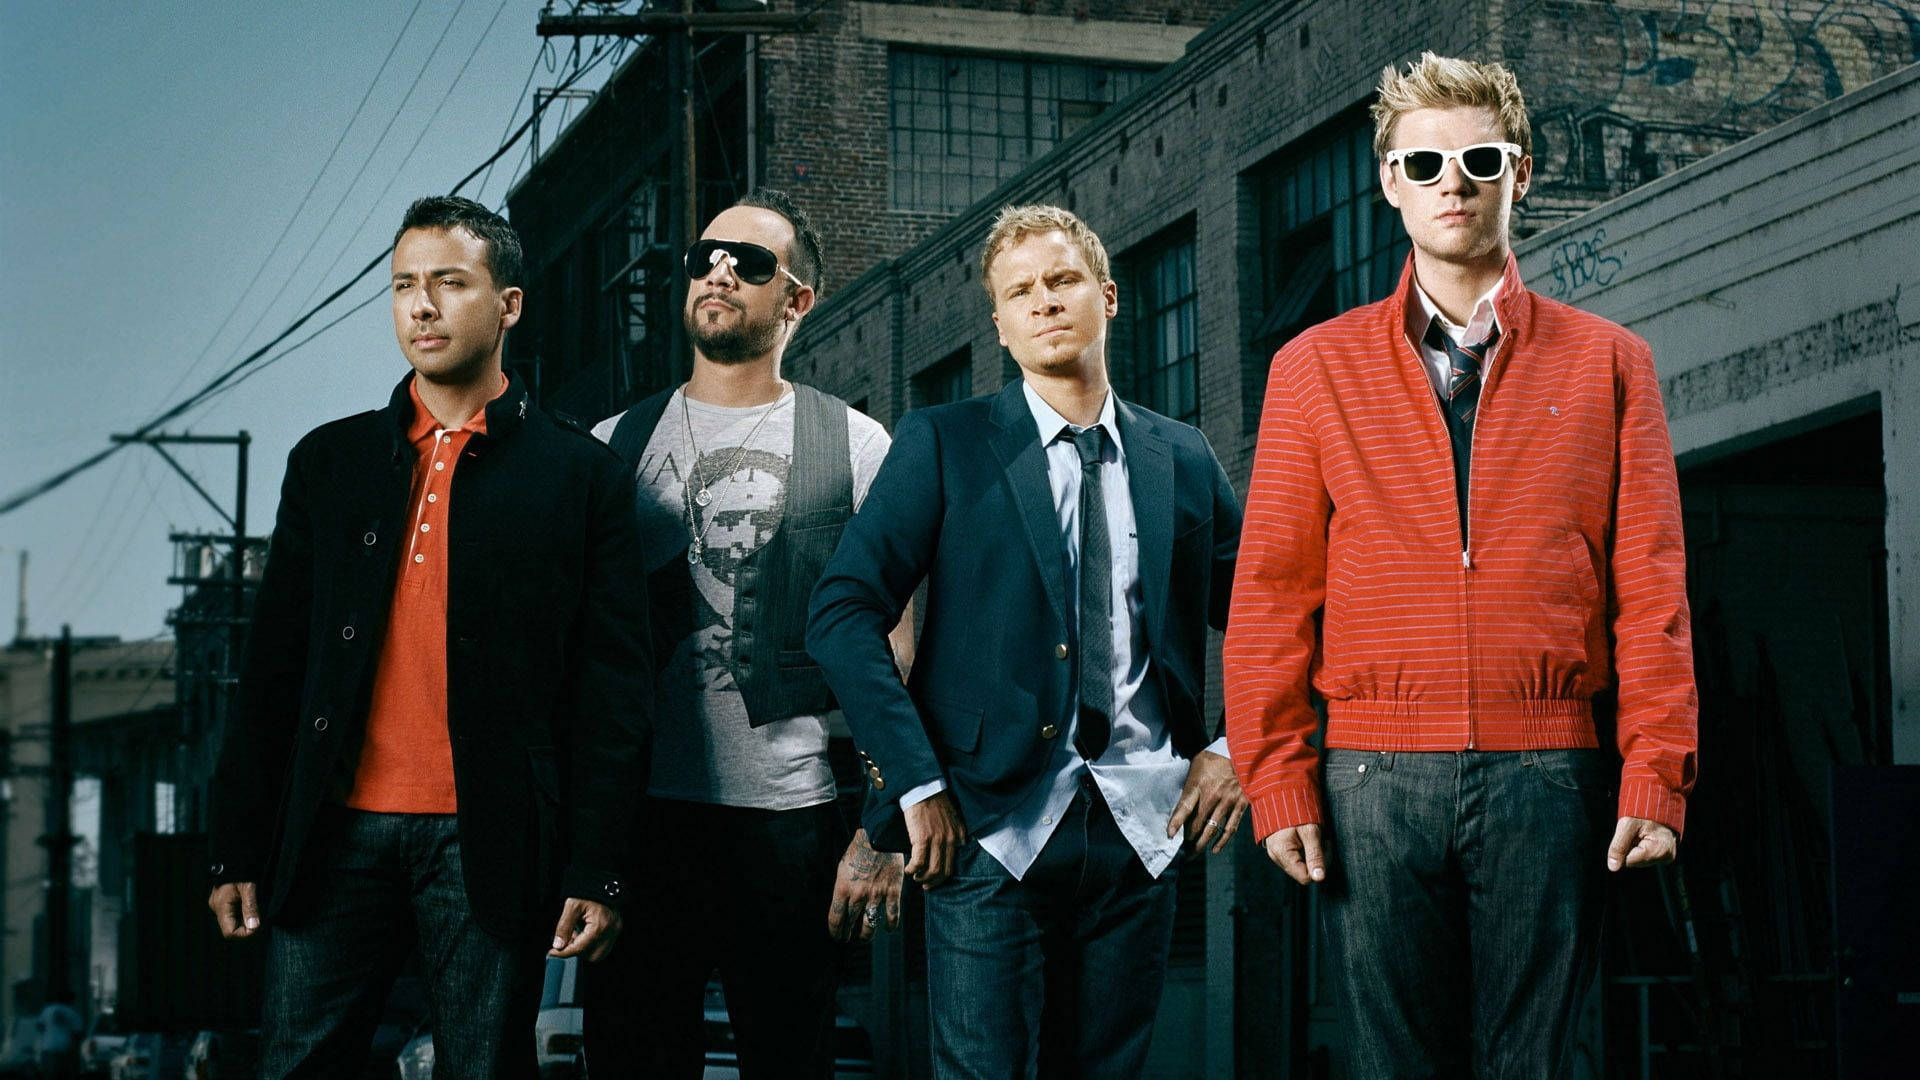 Group Backstreet Boys In Front Of Building Background